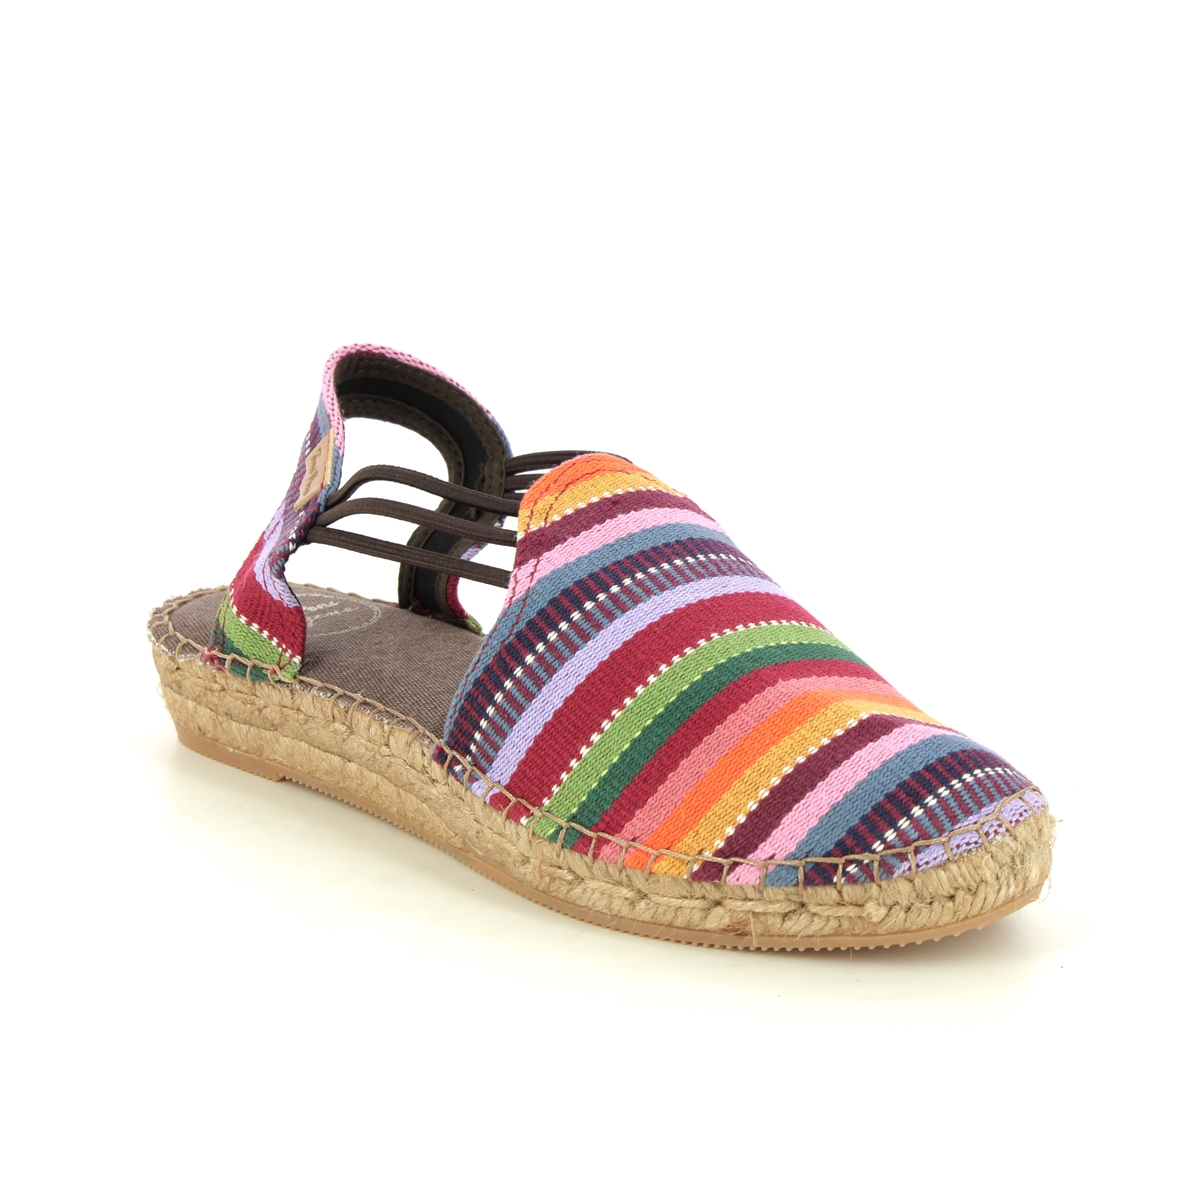 Toni Pons Norma Multi Coloured Womens Espadrilles 3050-95 in a Plain Canvas in Size 38